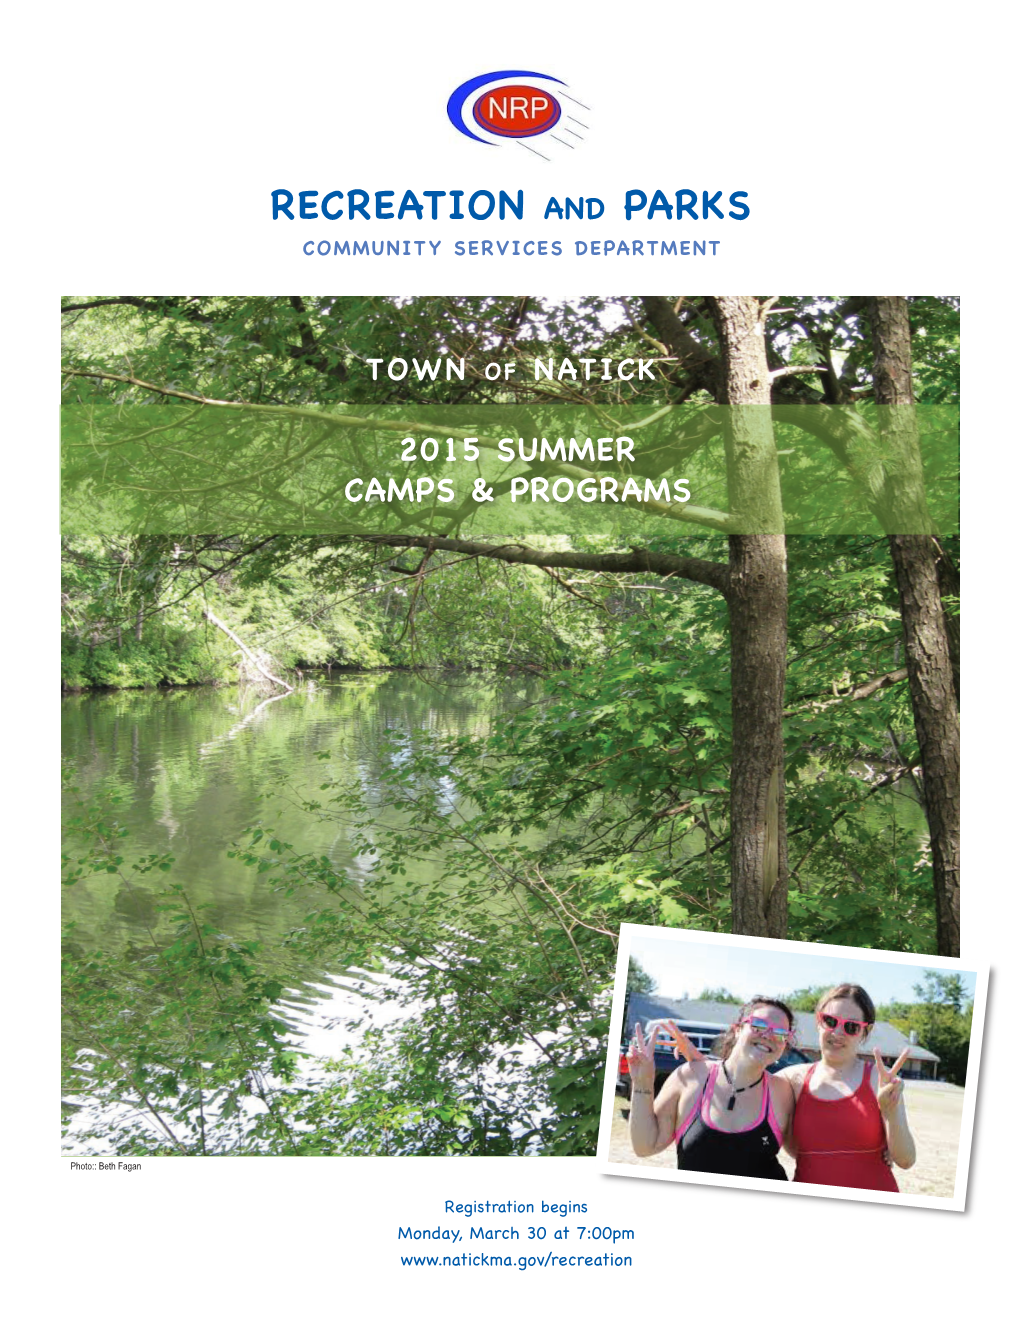 Recreation and Parks Community Services Department